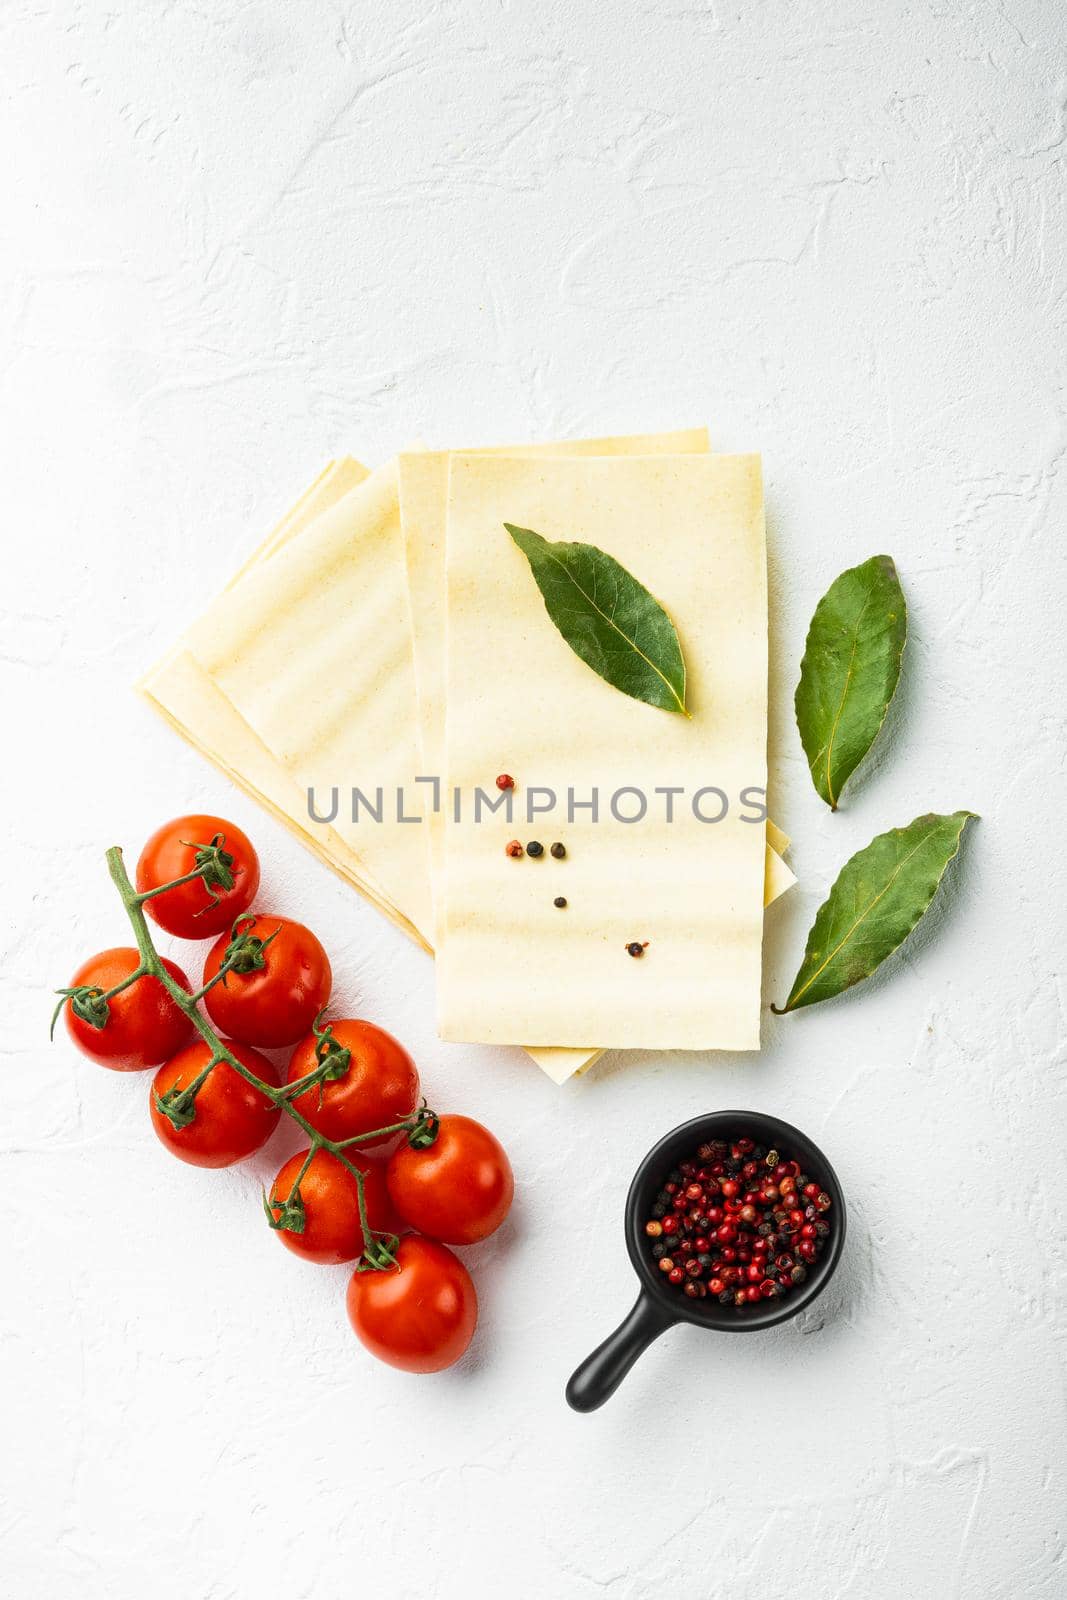 Dried uncooked lasagna pasta sheets set, with seasoning and herb, on white stone background, top view, flat lay